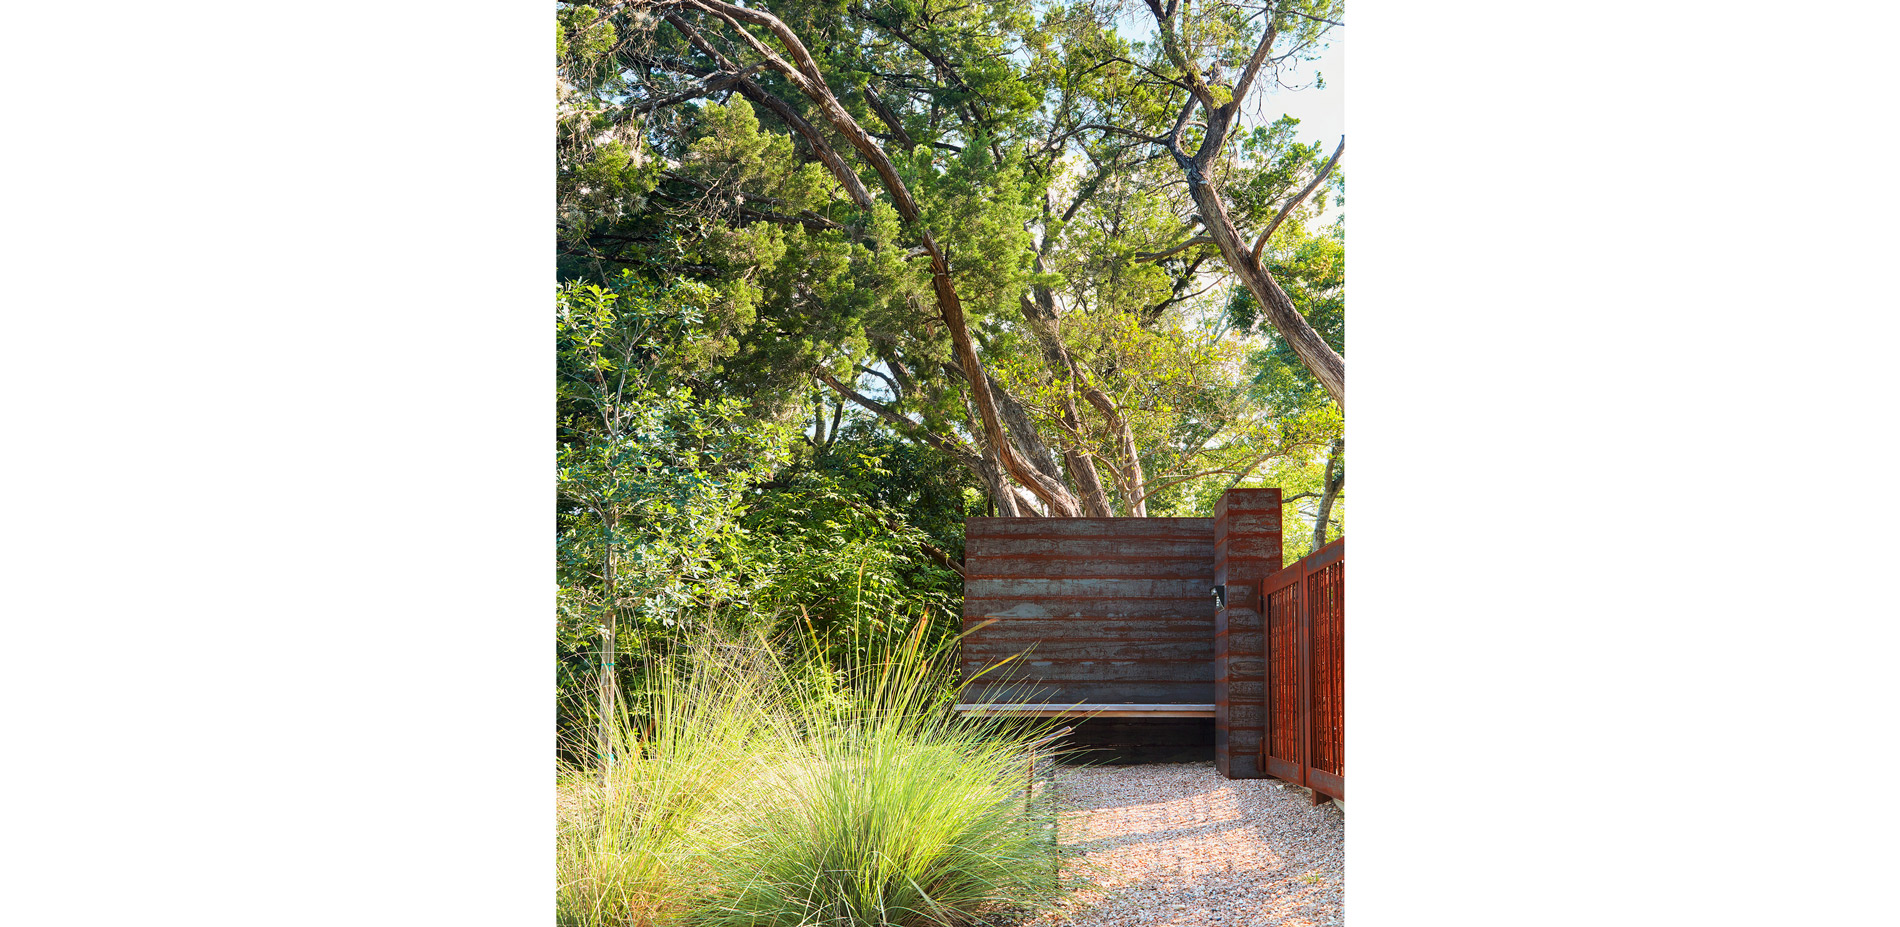 A steel and wood bench at the entry gate provides an invitation to stop and enjoy the garden.…